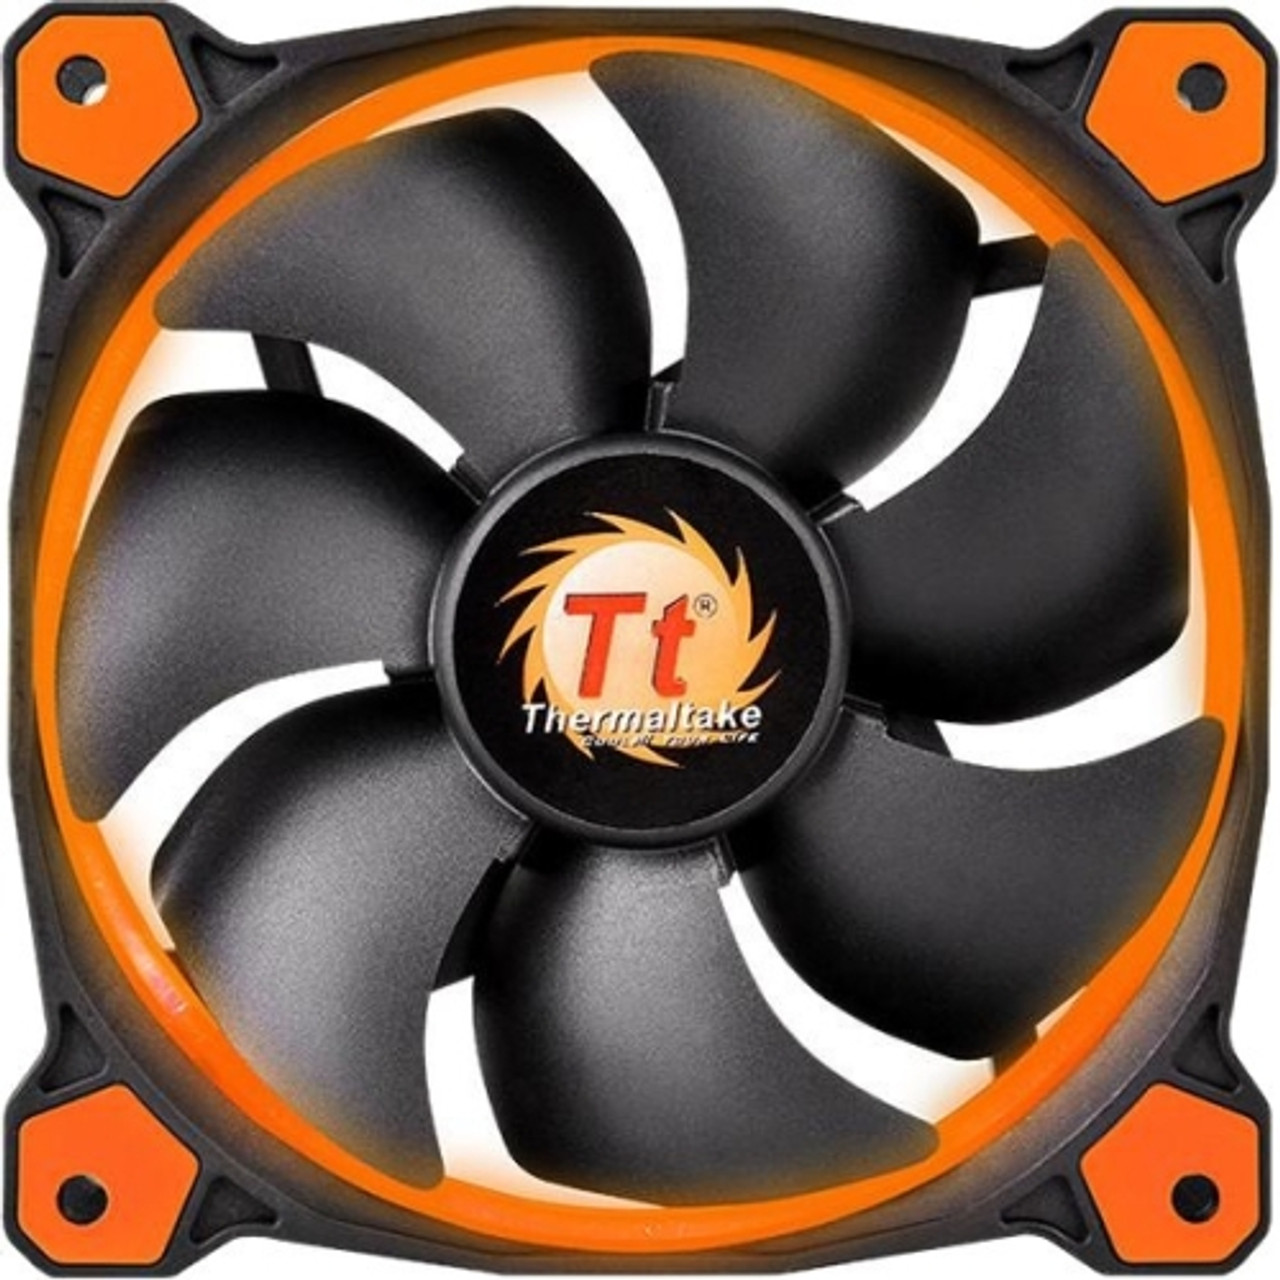 CL-F038-PL12OR-A Thermaltake Riing 12 High Static Pressure LED Radiator Fan